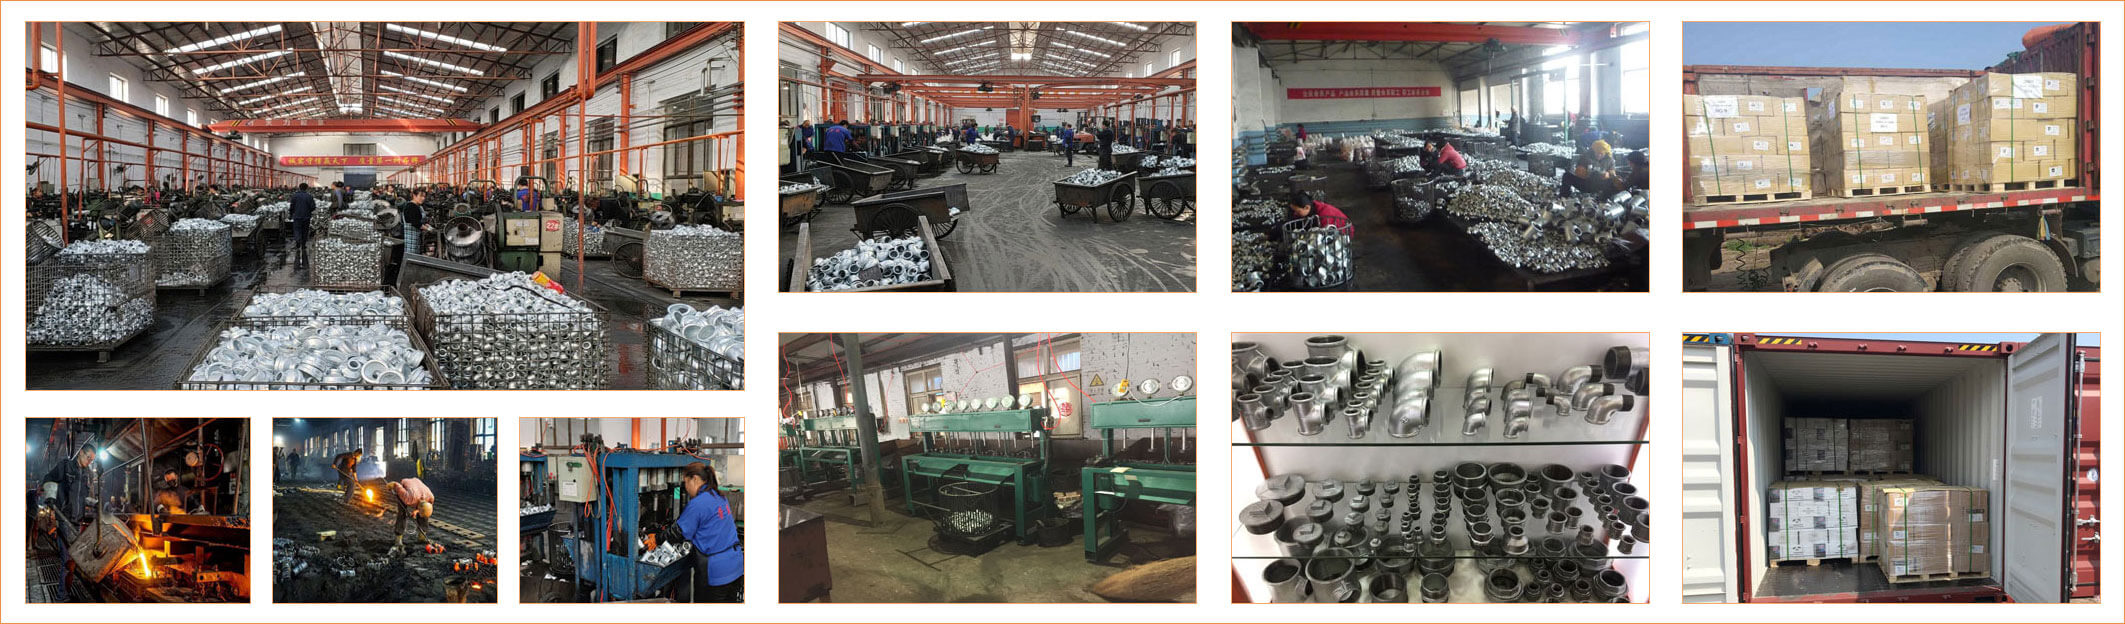 LAMAT PIPING is China's reputed and leading manufacturer and supplier in pipe fittings,flanges & valves,who has been supplying oversea markets for over 30 years.